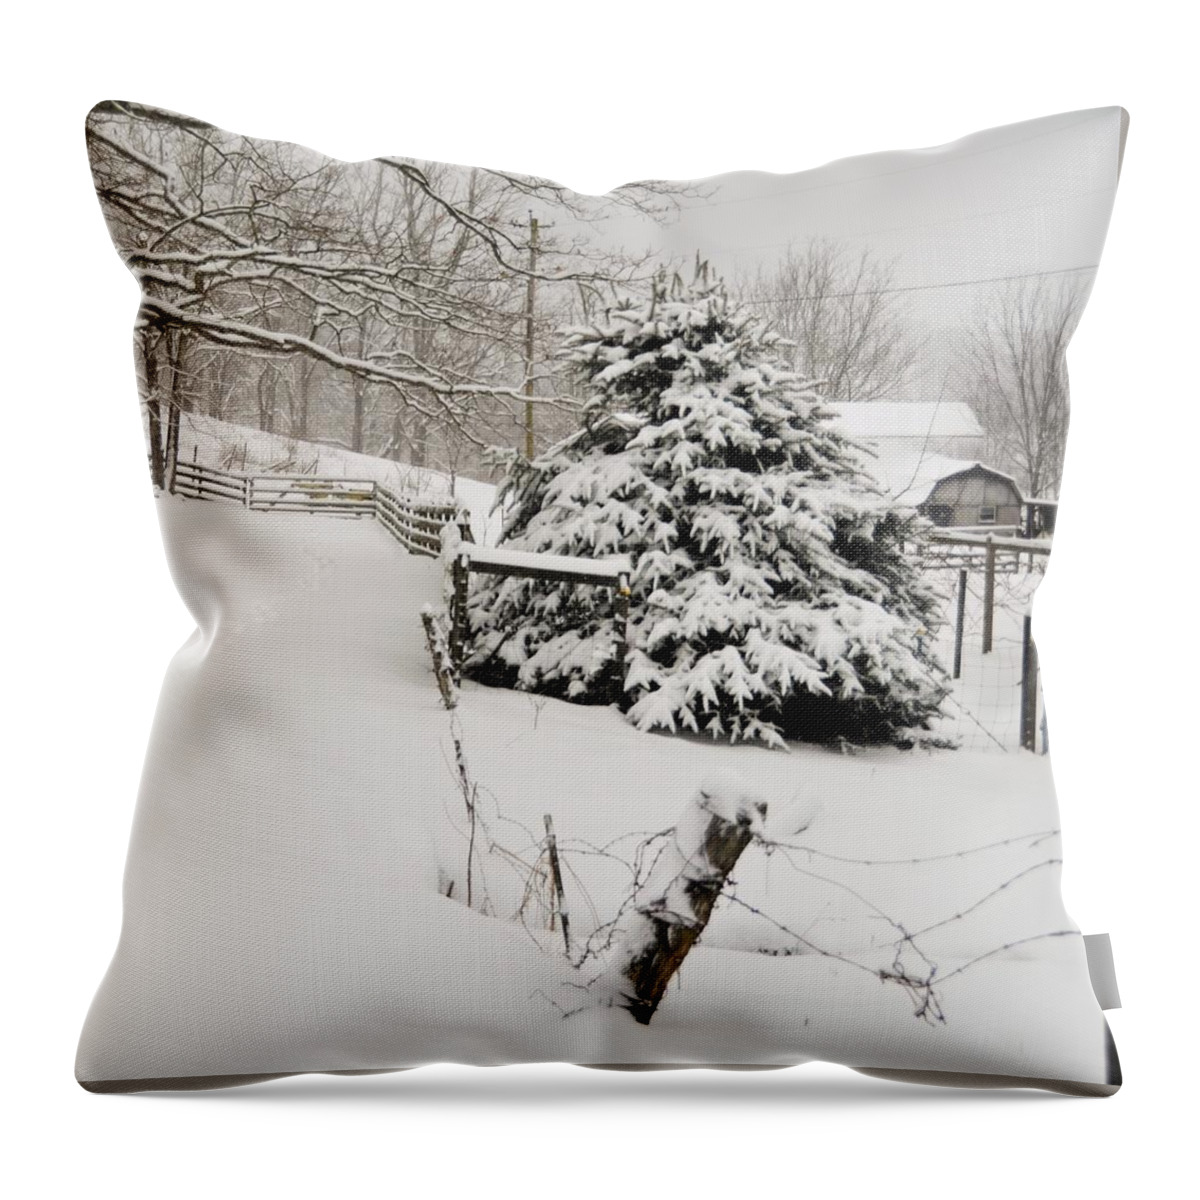  Throw Pillow featuring the photograph Snow Tree by Chuck Brown